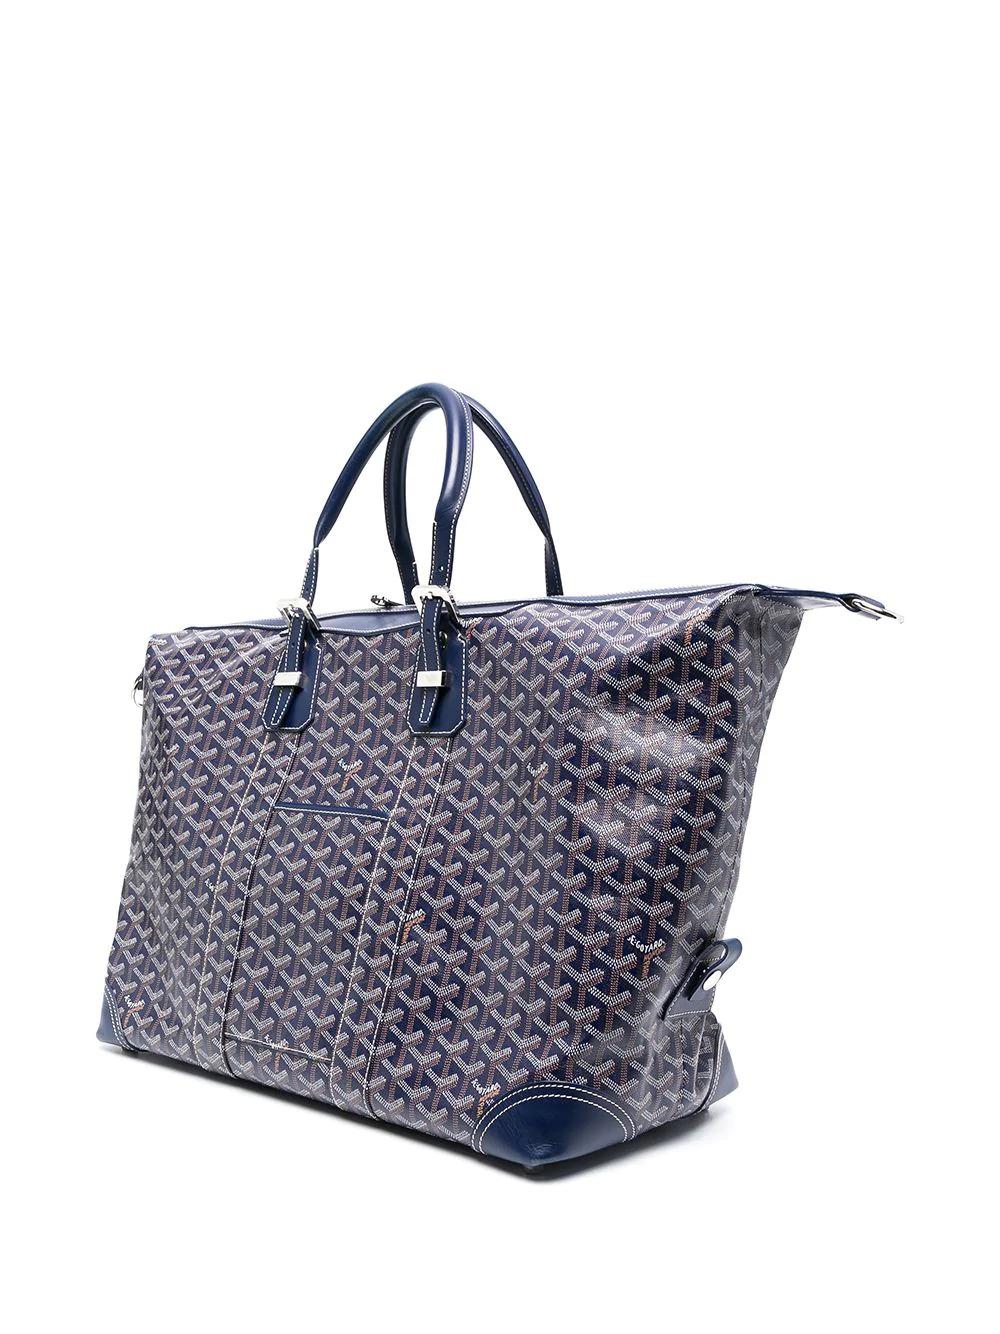 Elegant Goyard Boeing 55 travel bag in navy monogram canvas and navy leather, hardware in silver metal, double adjustable handle in navy leather allowing the bag to be worn in the hand. The zip closure opens up to the main compartment and a smaller